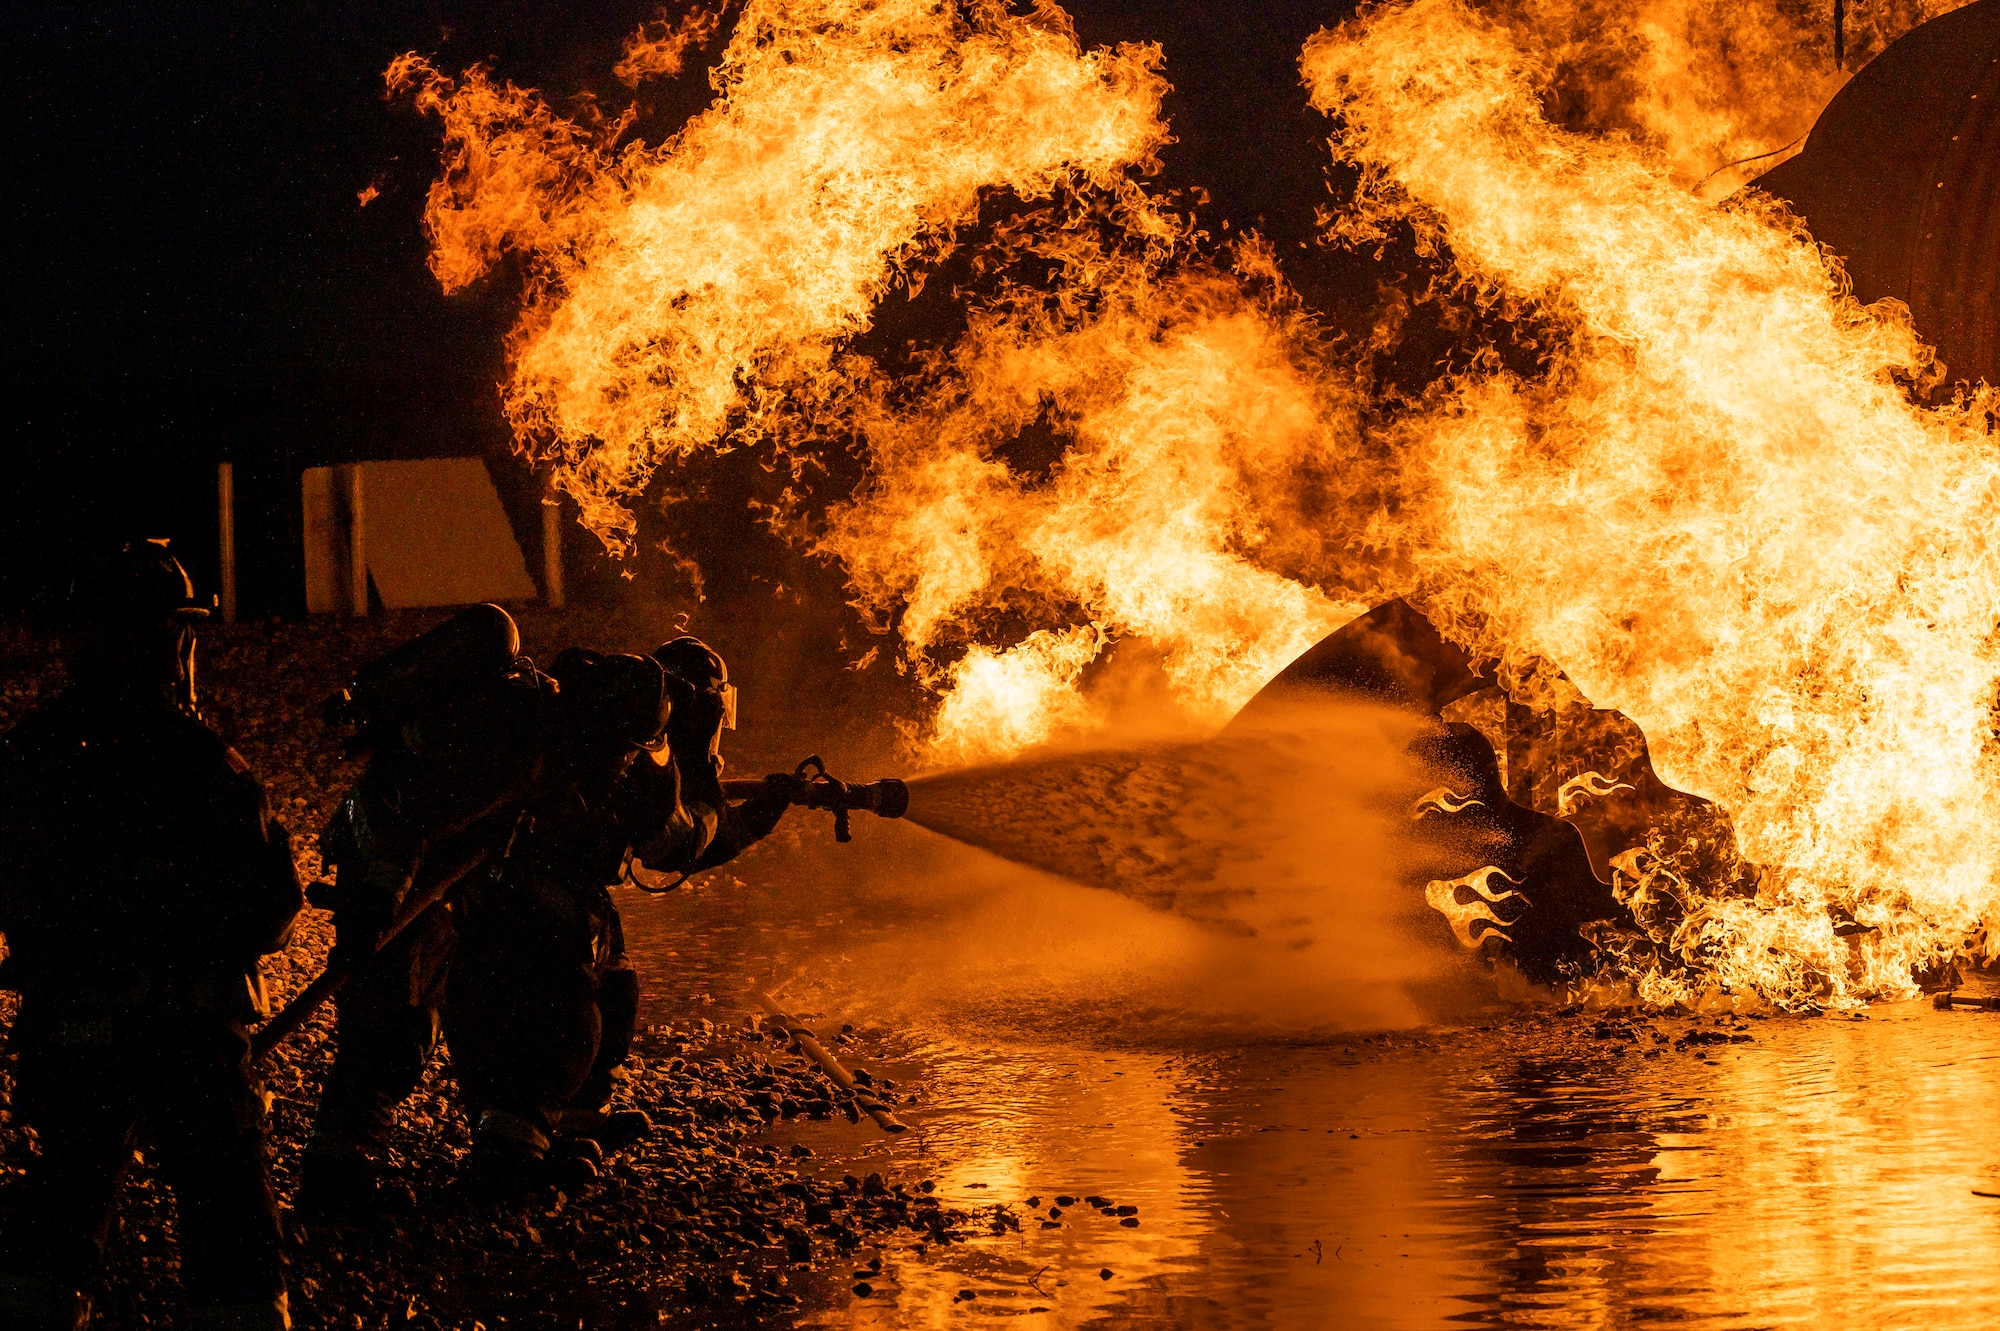 Firefighters from the 436th Civil Engineer Squadron and Magnolia Volunteer Fire Company Station 55, from Delaware, spray down an aircraft-fire trainer during a live-fire-burn exercise at night Sept. 28, 2020, on Dover Air Force Base, Delaware. Total Force and civilian fire companies in the surrounding community often partner with Dover AFB to complete annual training requirements. (U.S. Air Force photo by Senior Airman Christopher Quail)